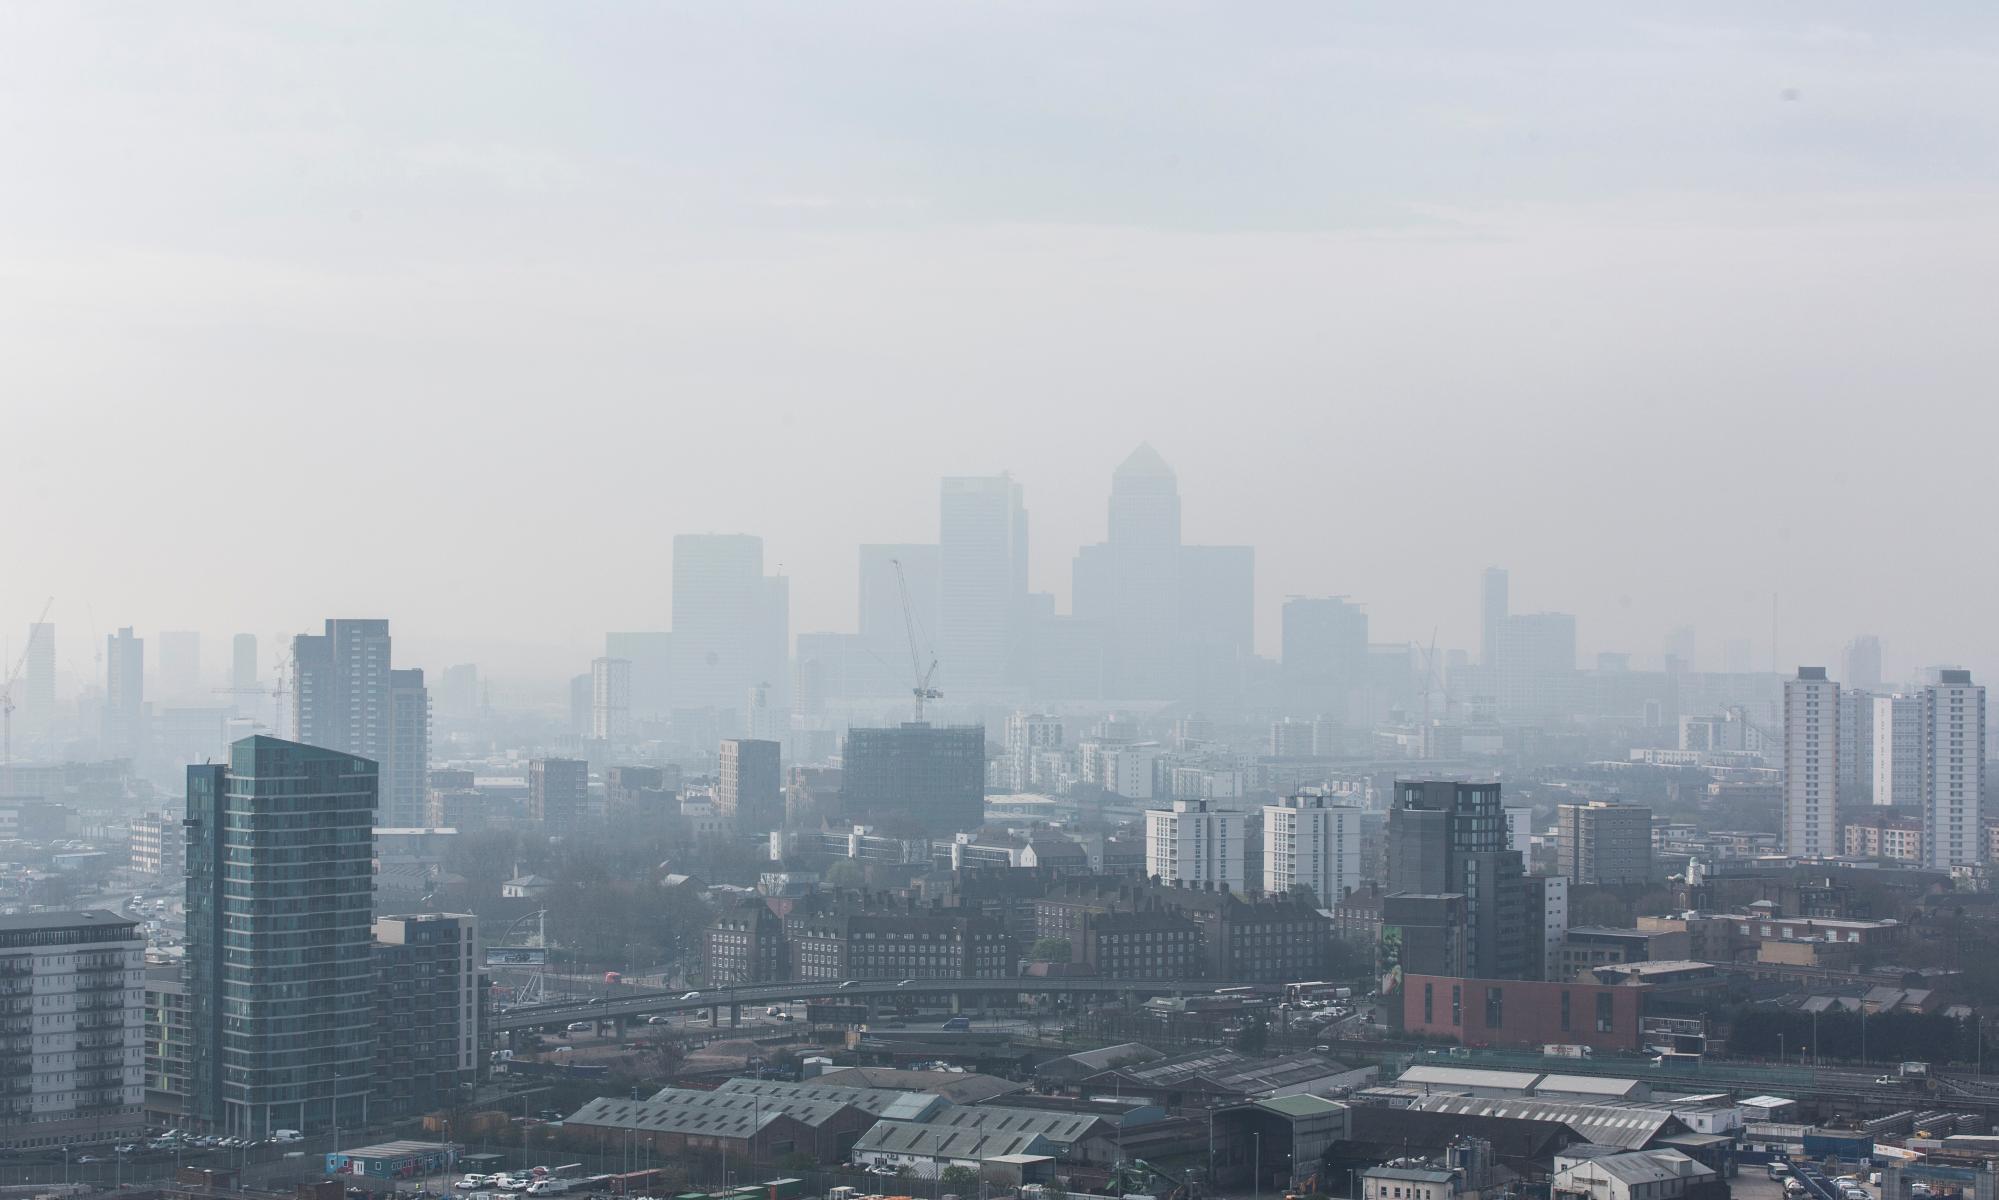 Urban populations in south-east at greatest risk from air pollution